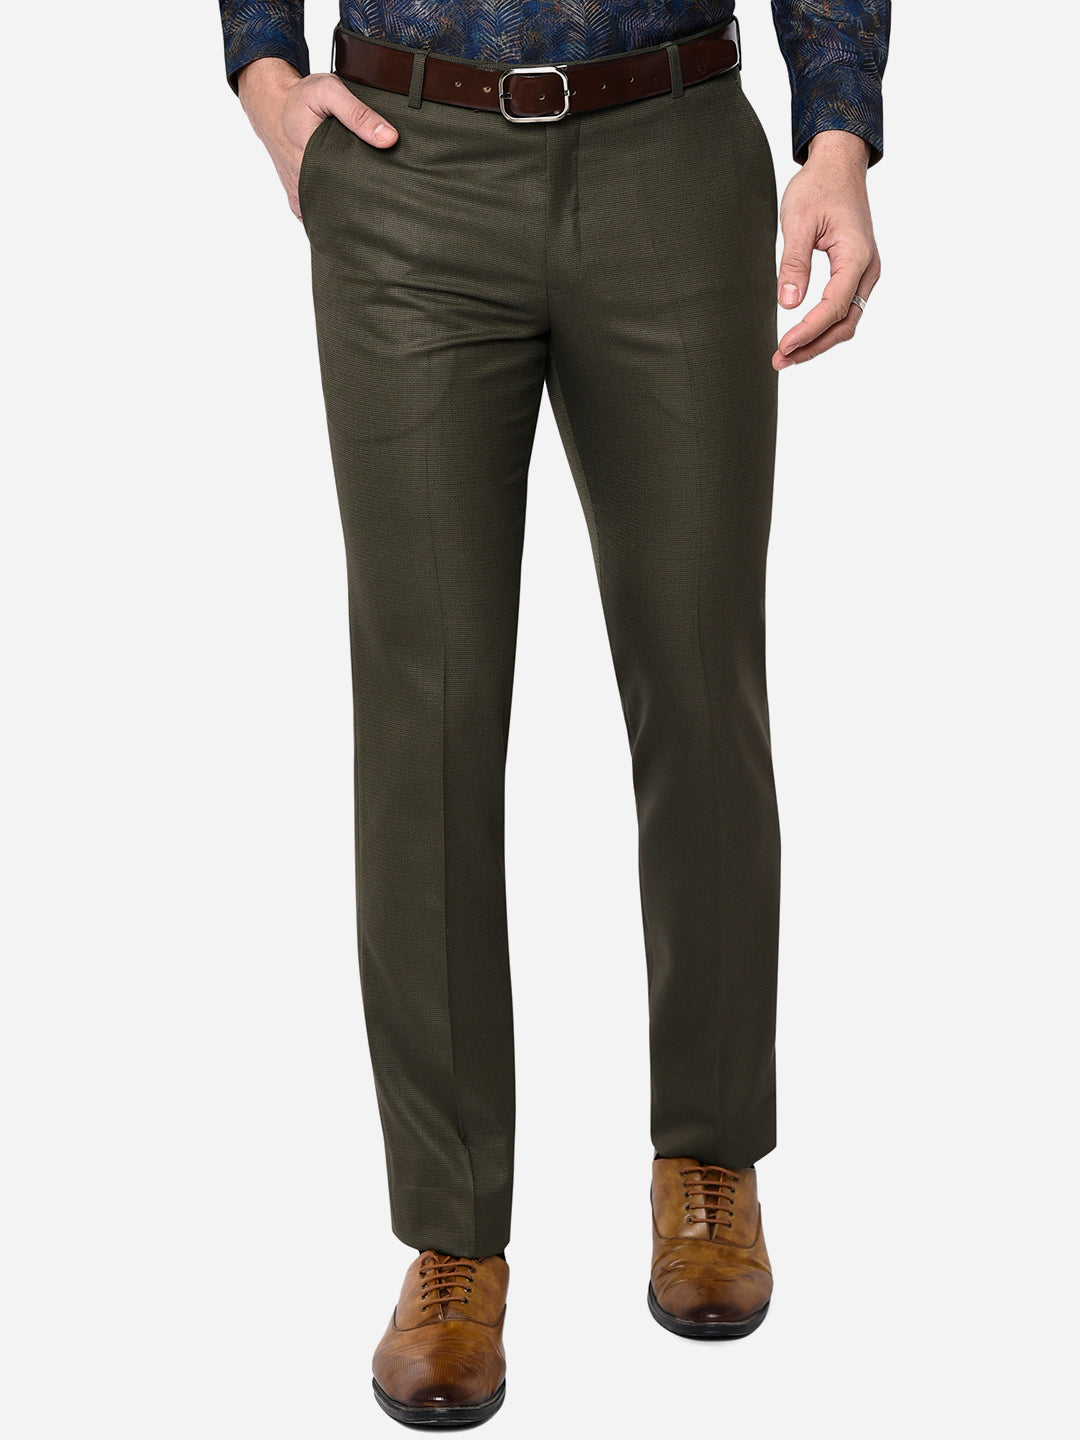 Buy Black Trousers  Pants for Men by INDEPENDENCE Online  Ajiocom